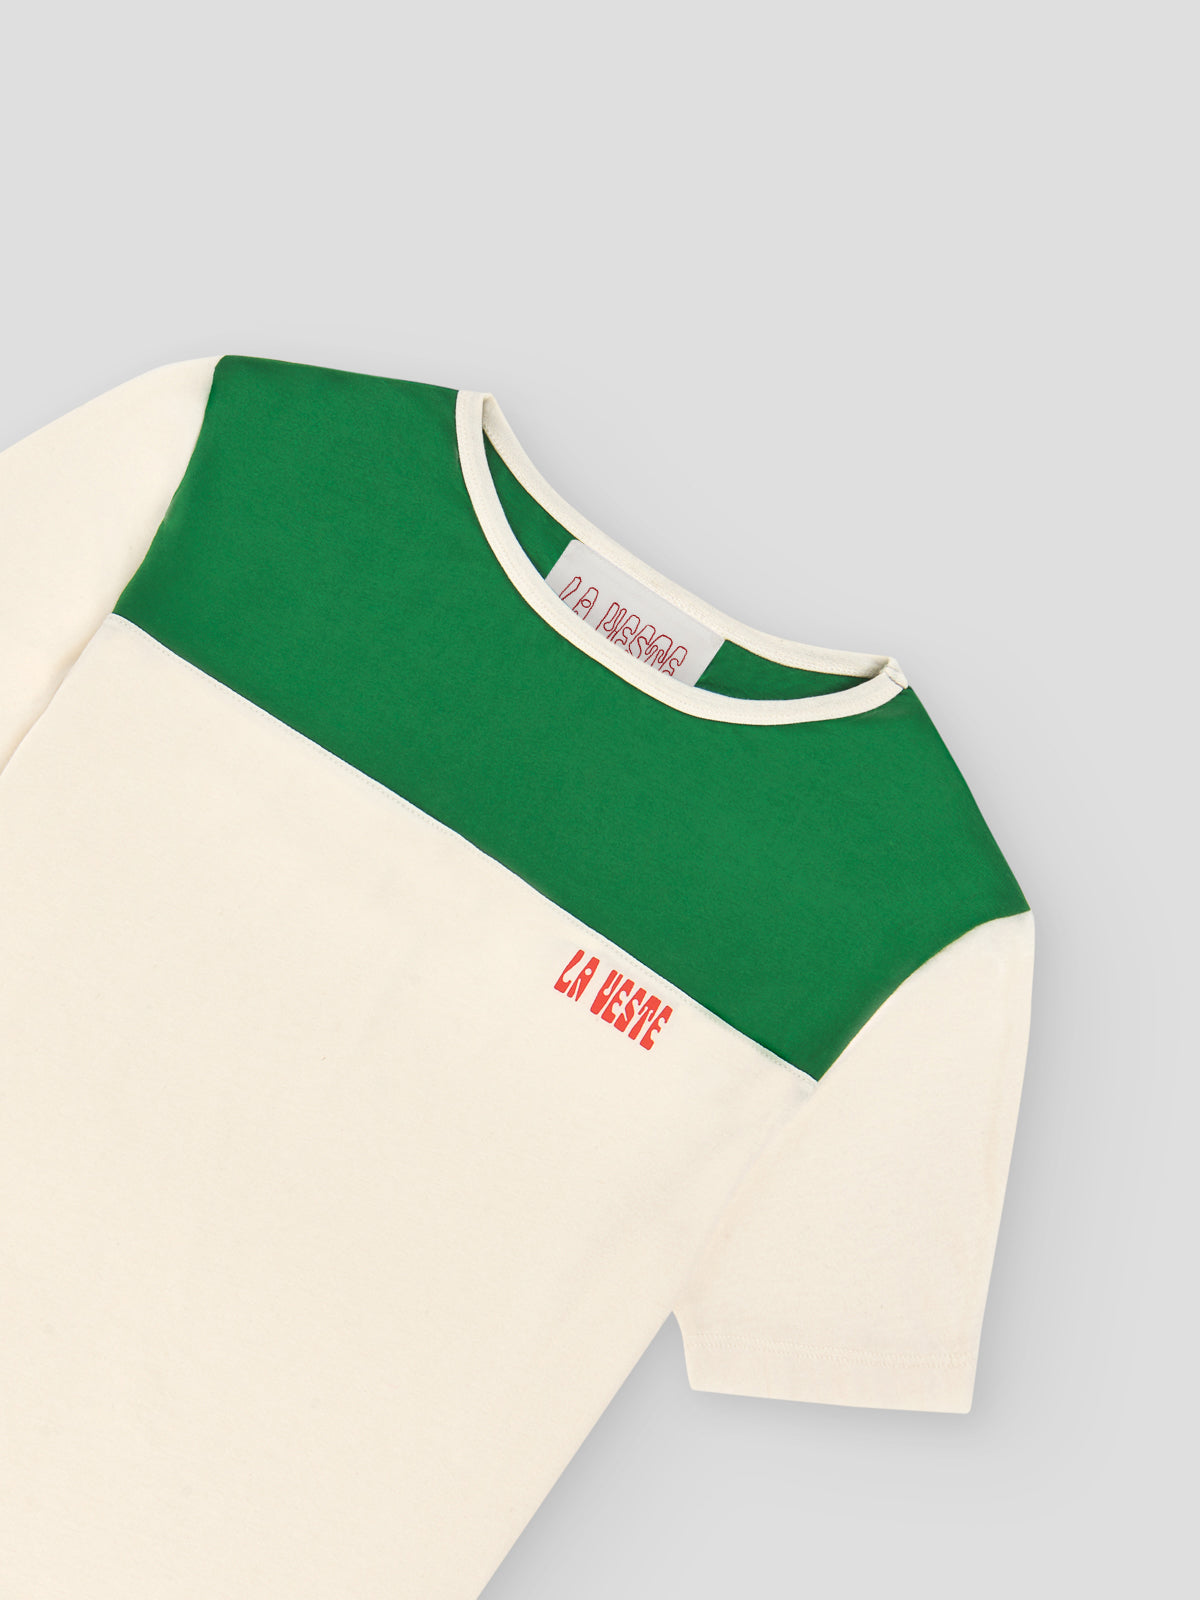 White cotton T-shirt with LA VESTE logo and green top